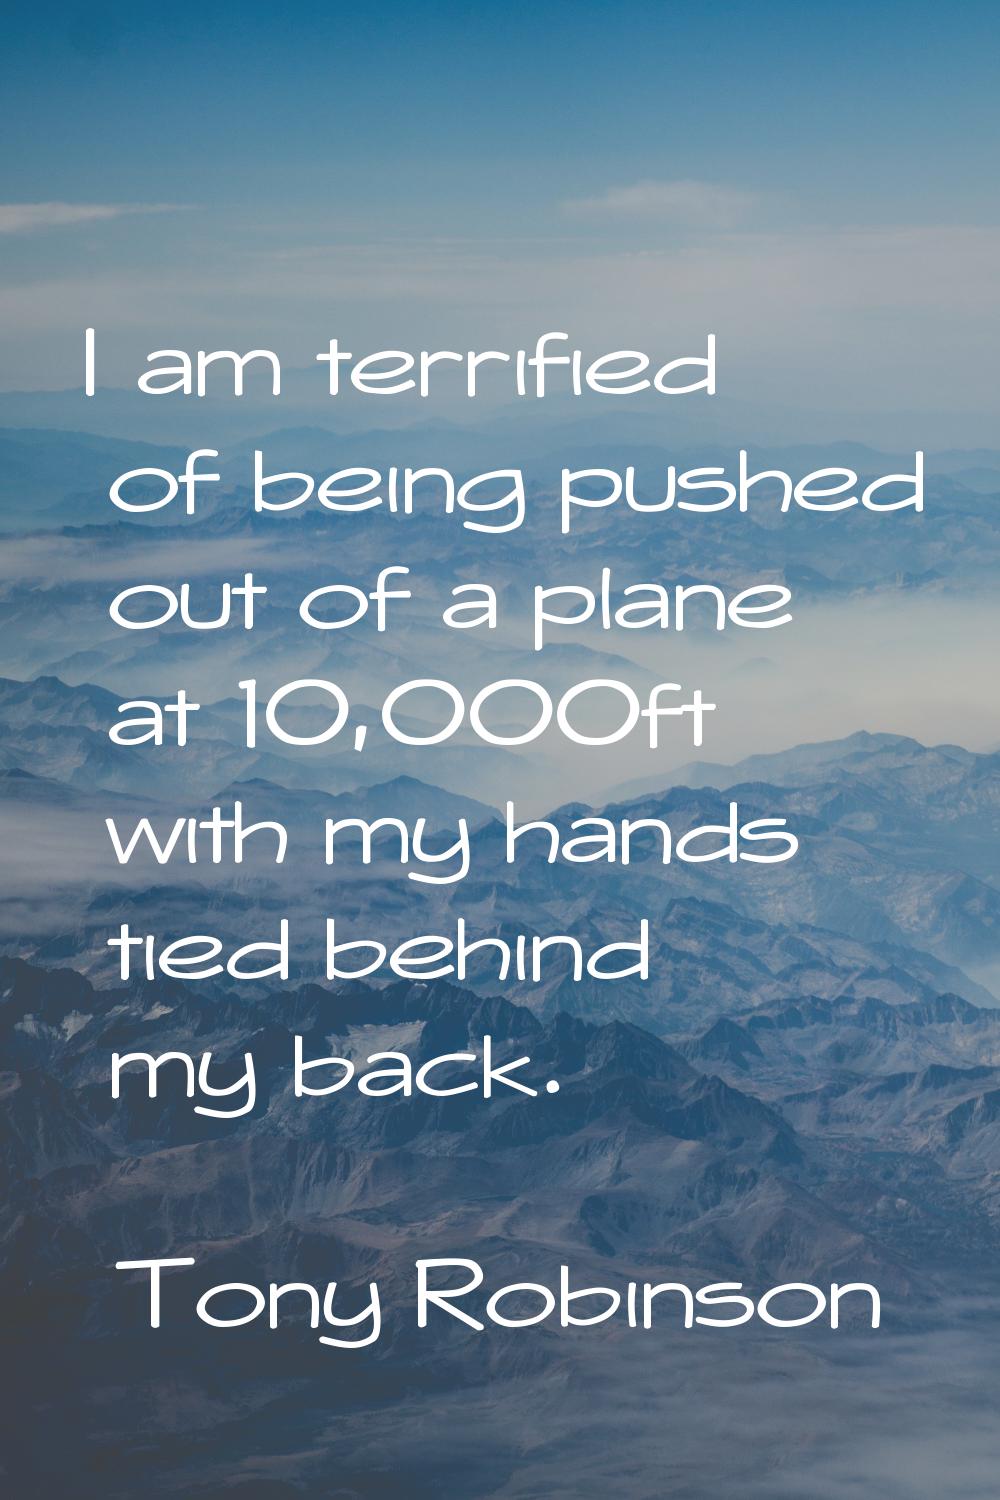 I am terrified of being pushed out of a plane at 10,000ft with my hands tied behind my back.